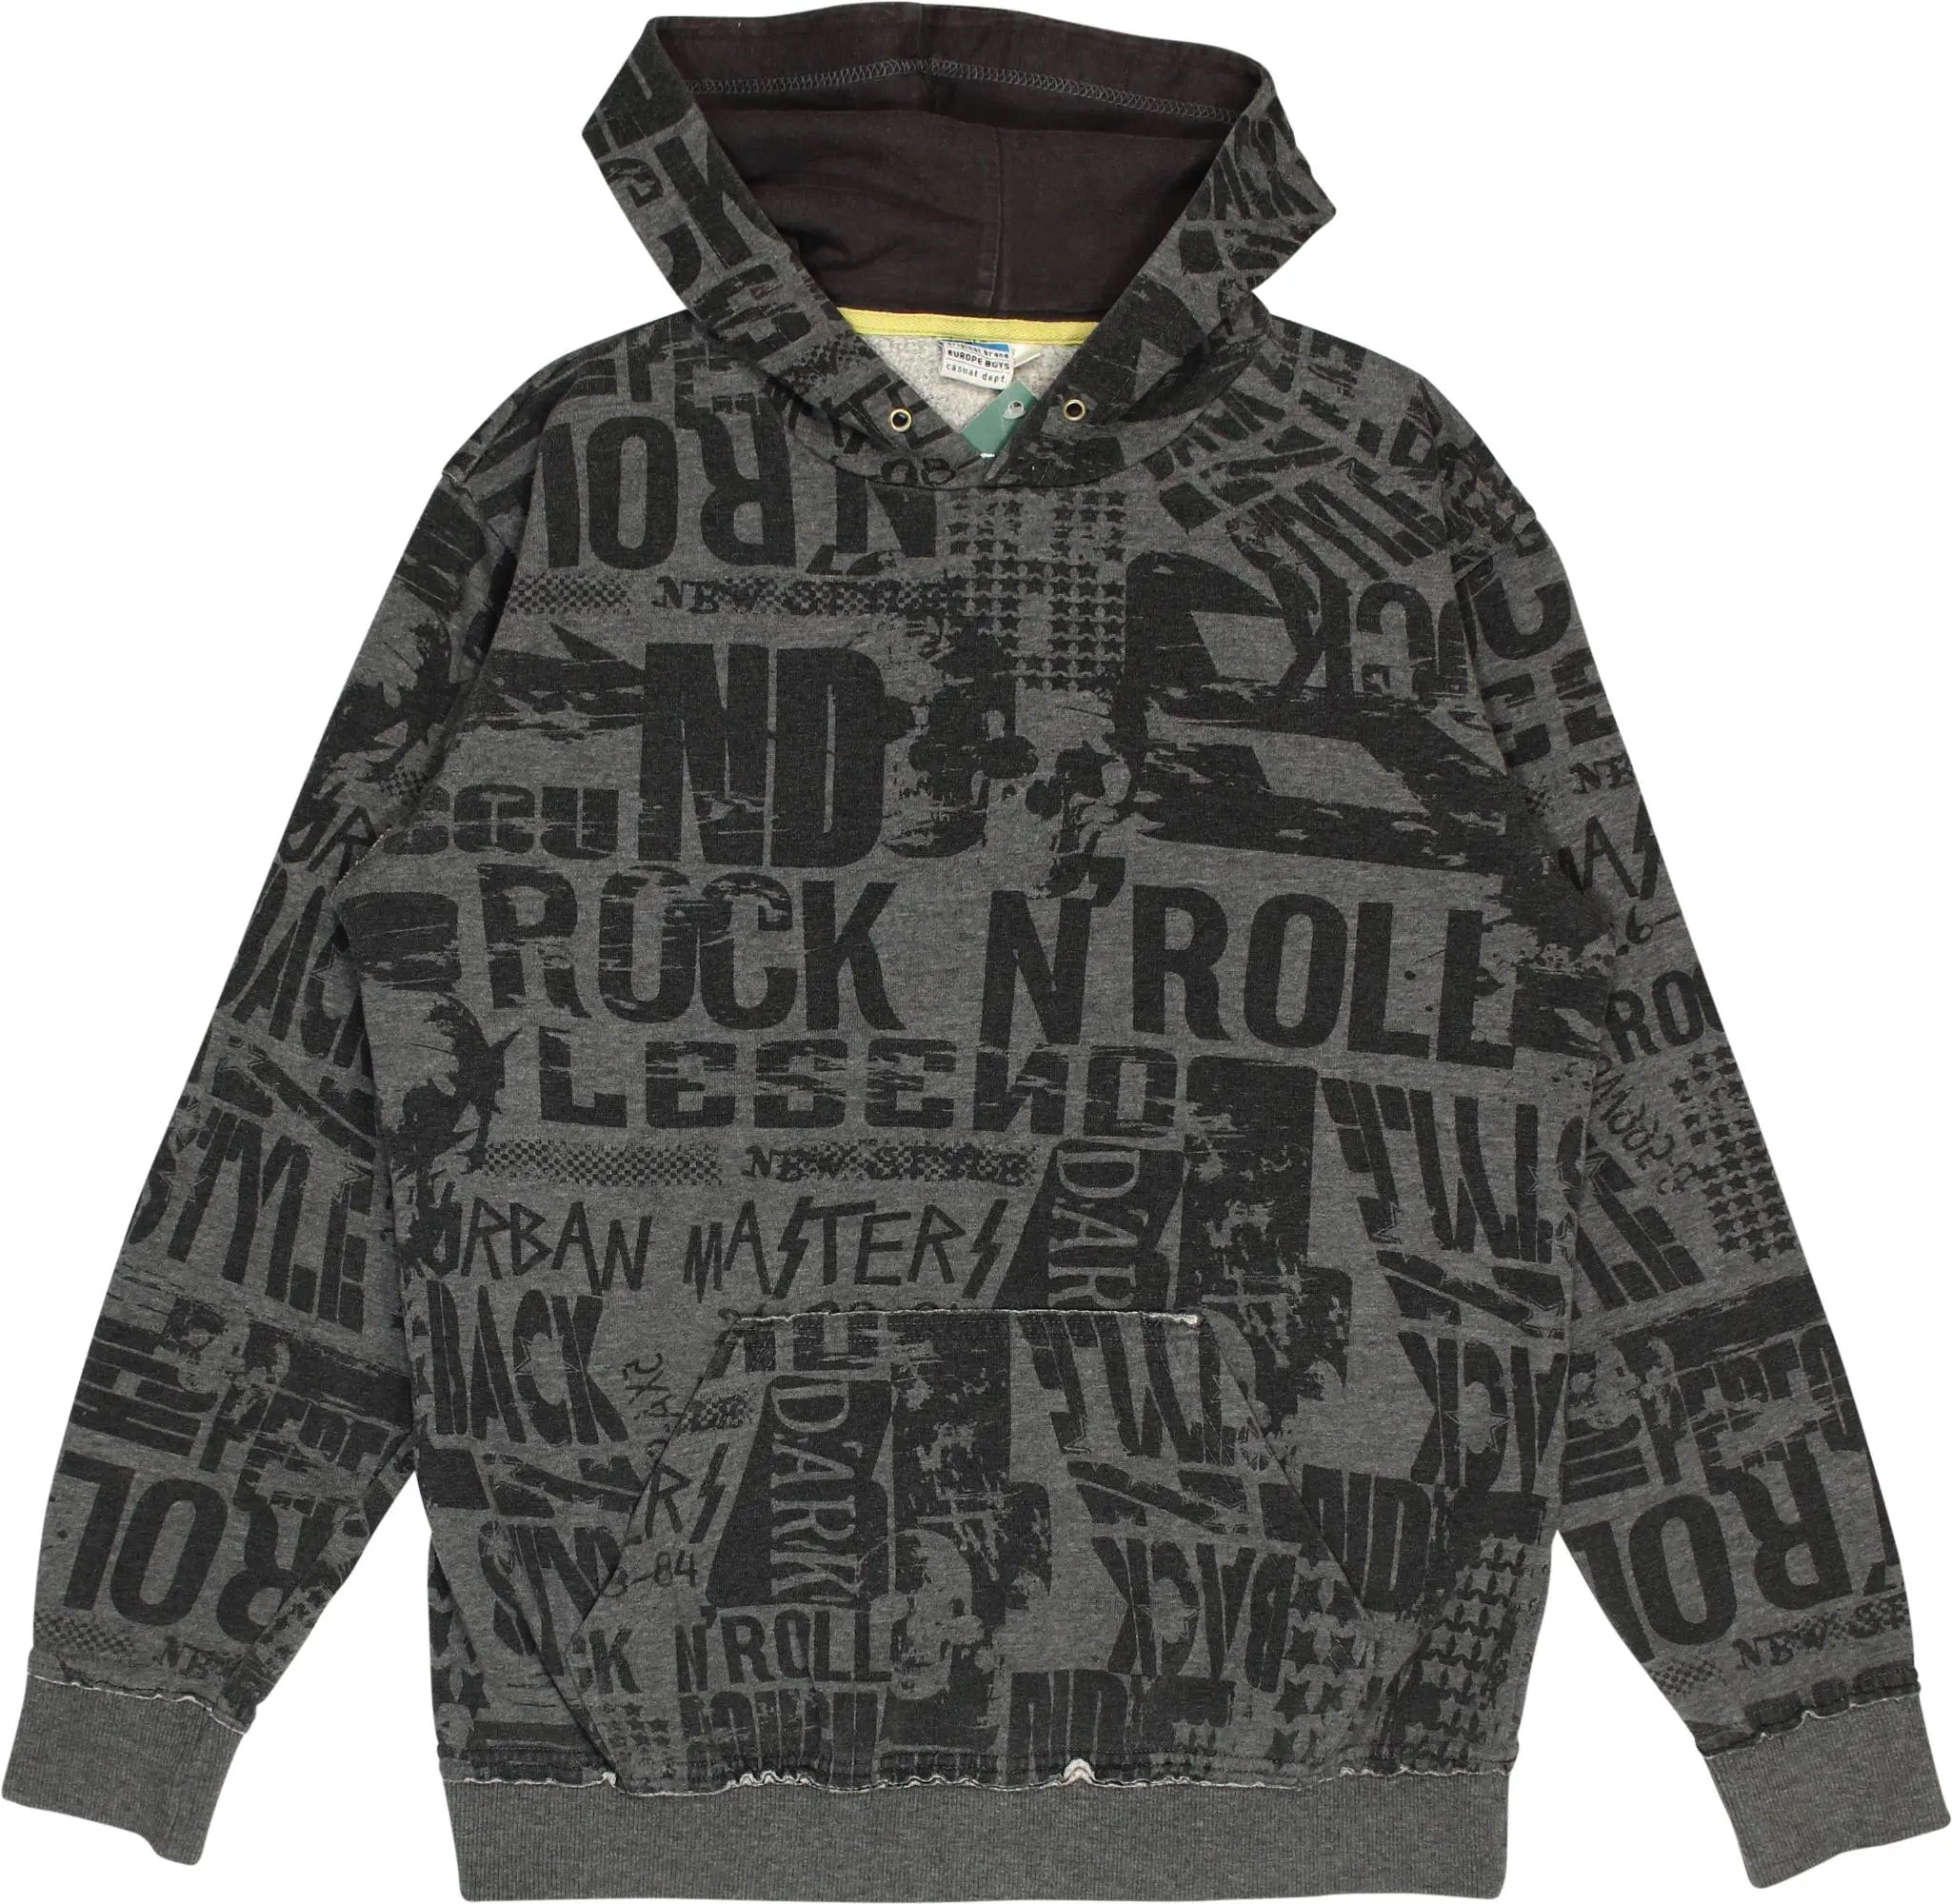 Europe Boys - Grey Hoodie by Europe Boys- ThriftTale.com - Vintage and second handclothing